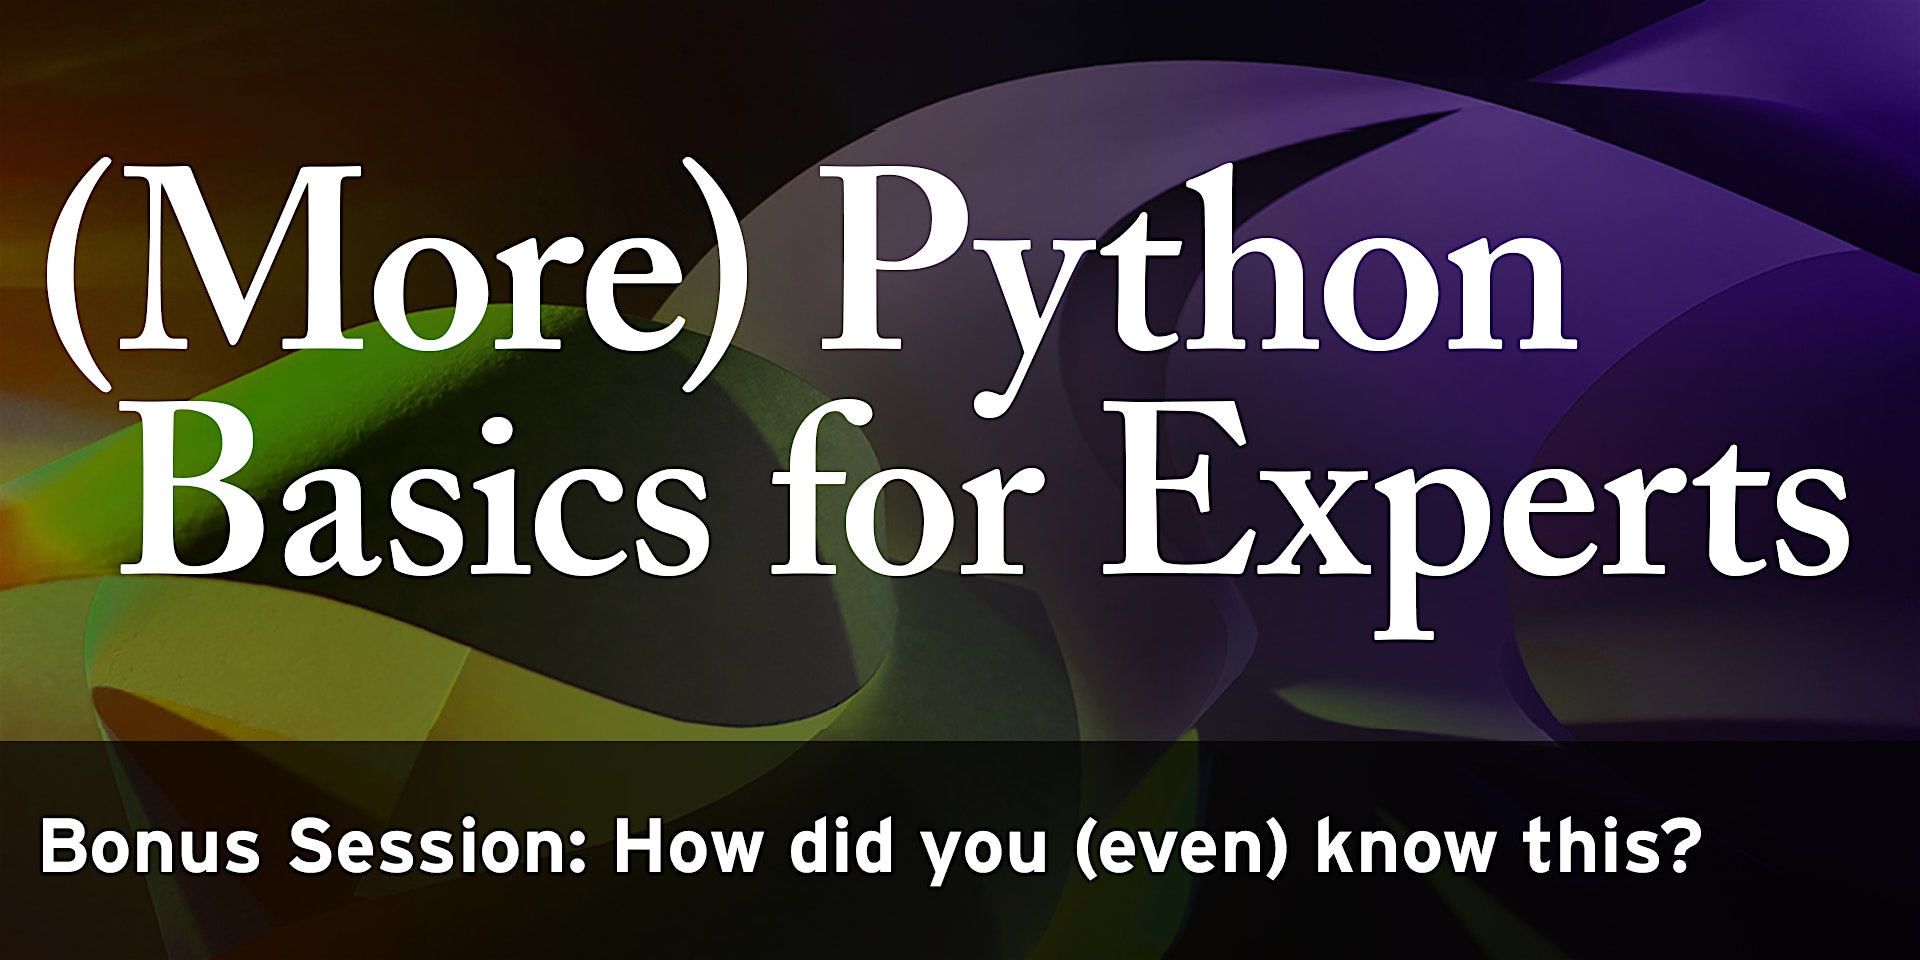 THU, AUG 18, 2022 - (More) Python Basics for Experts BONUS - How did you (even) know this?